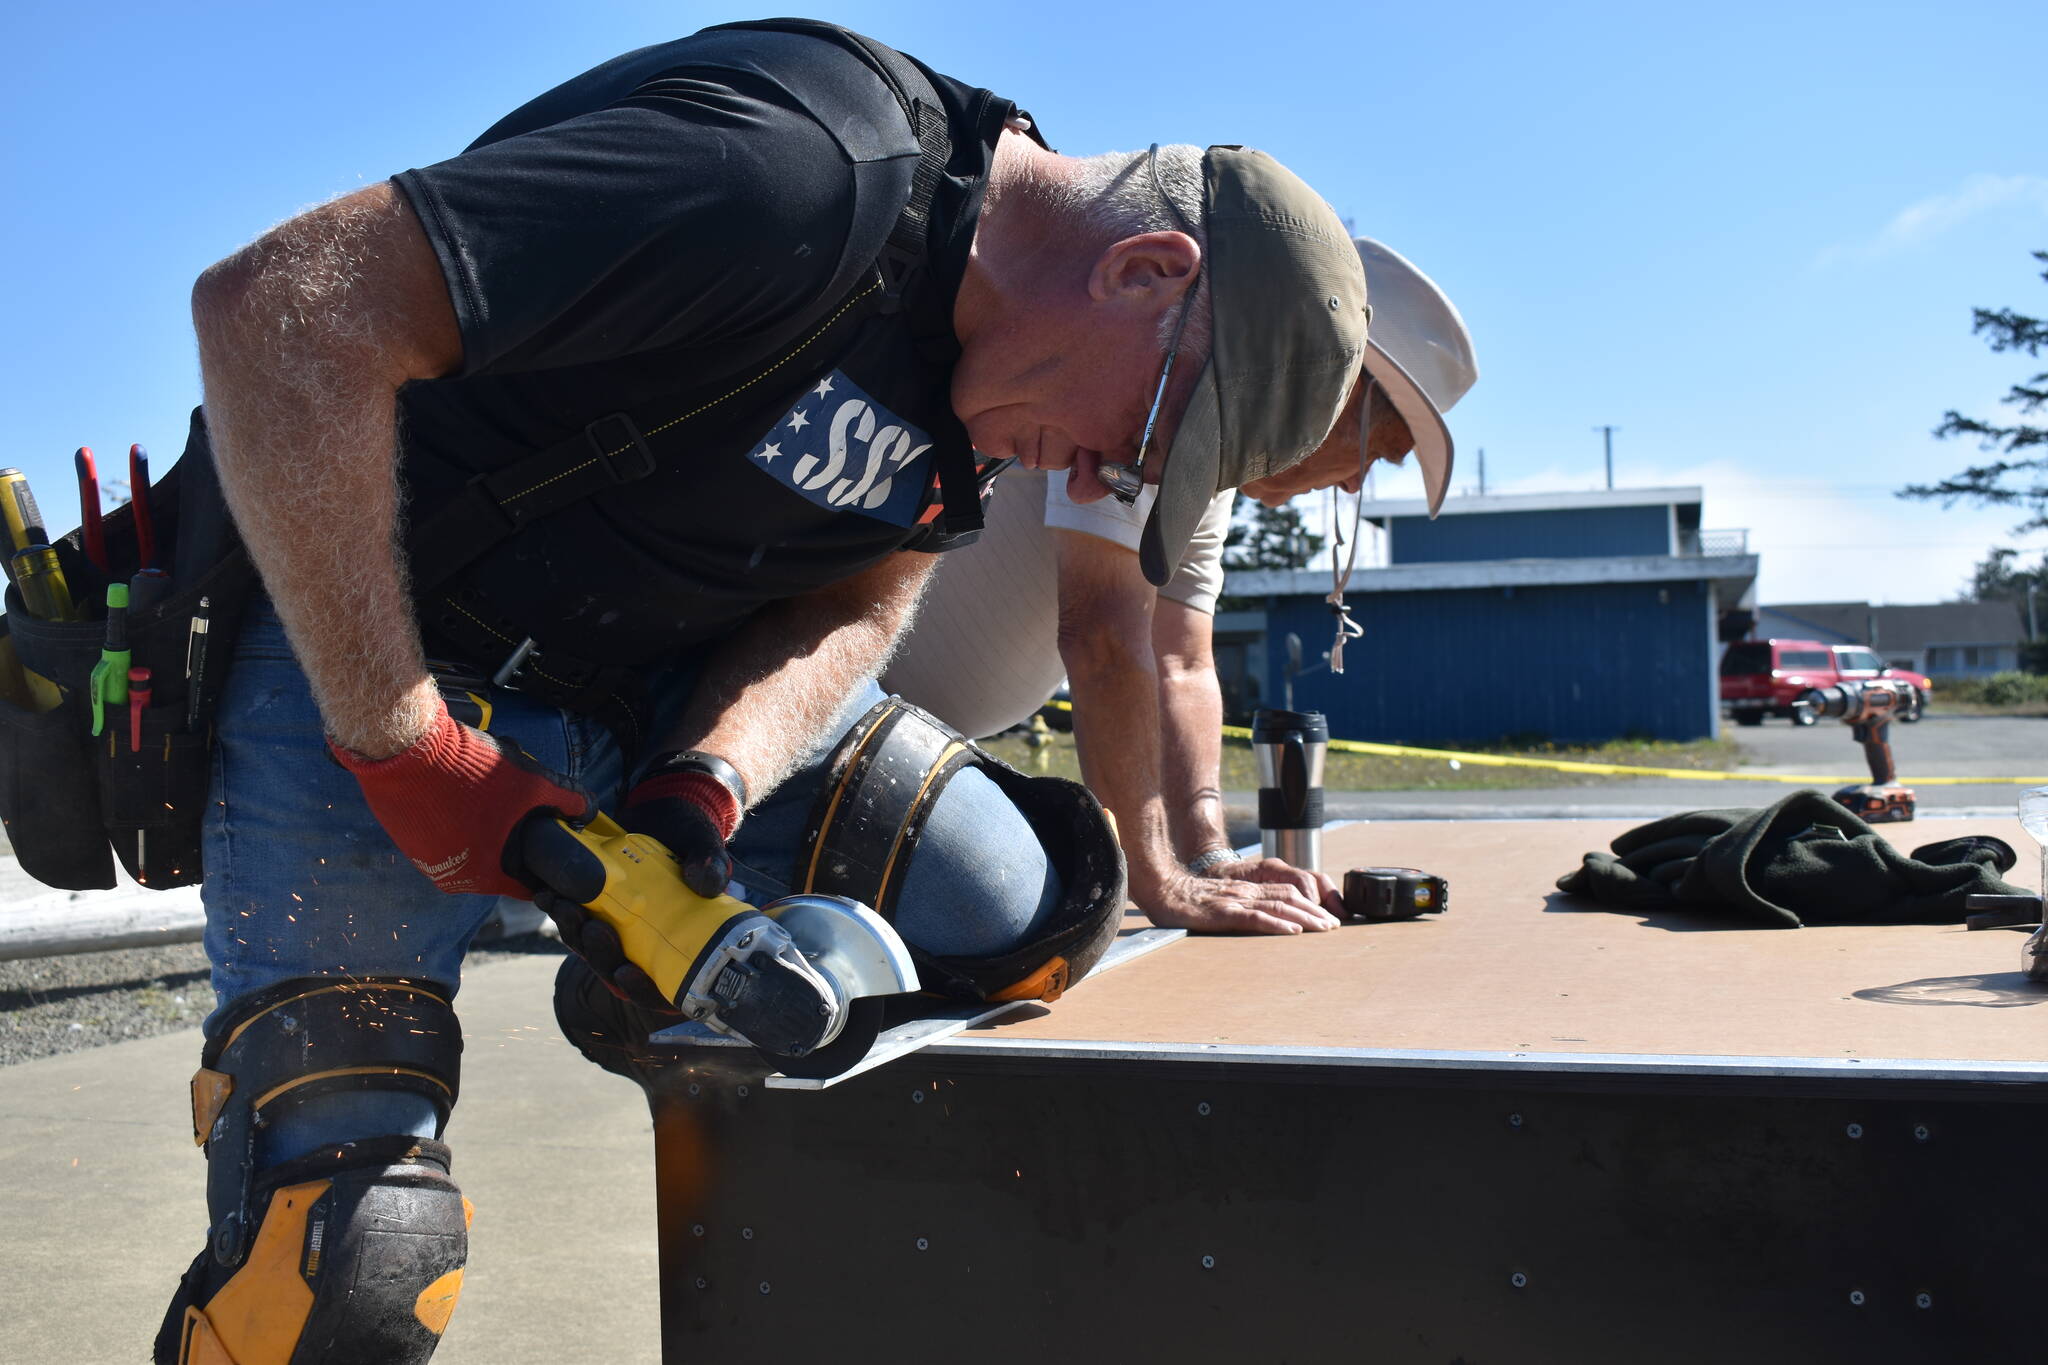 Clayton Franke / The Daily World
Sparks fly from the saw of Gary Pease as he saws a piece of metal to add to the Ocean Shores skatepark on Friday, Sept. 7.